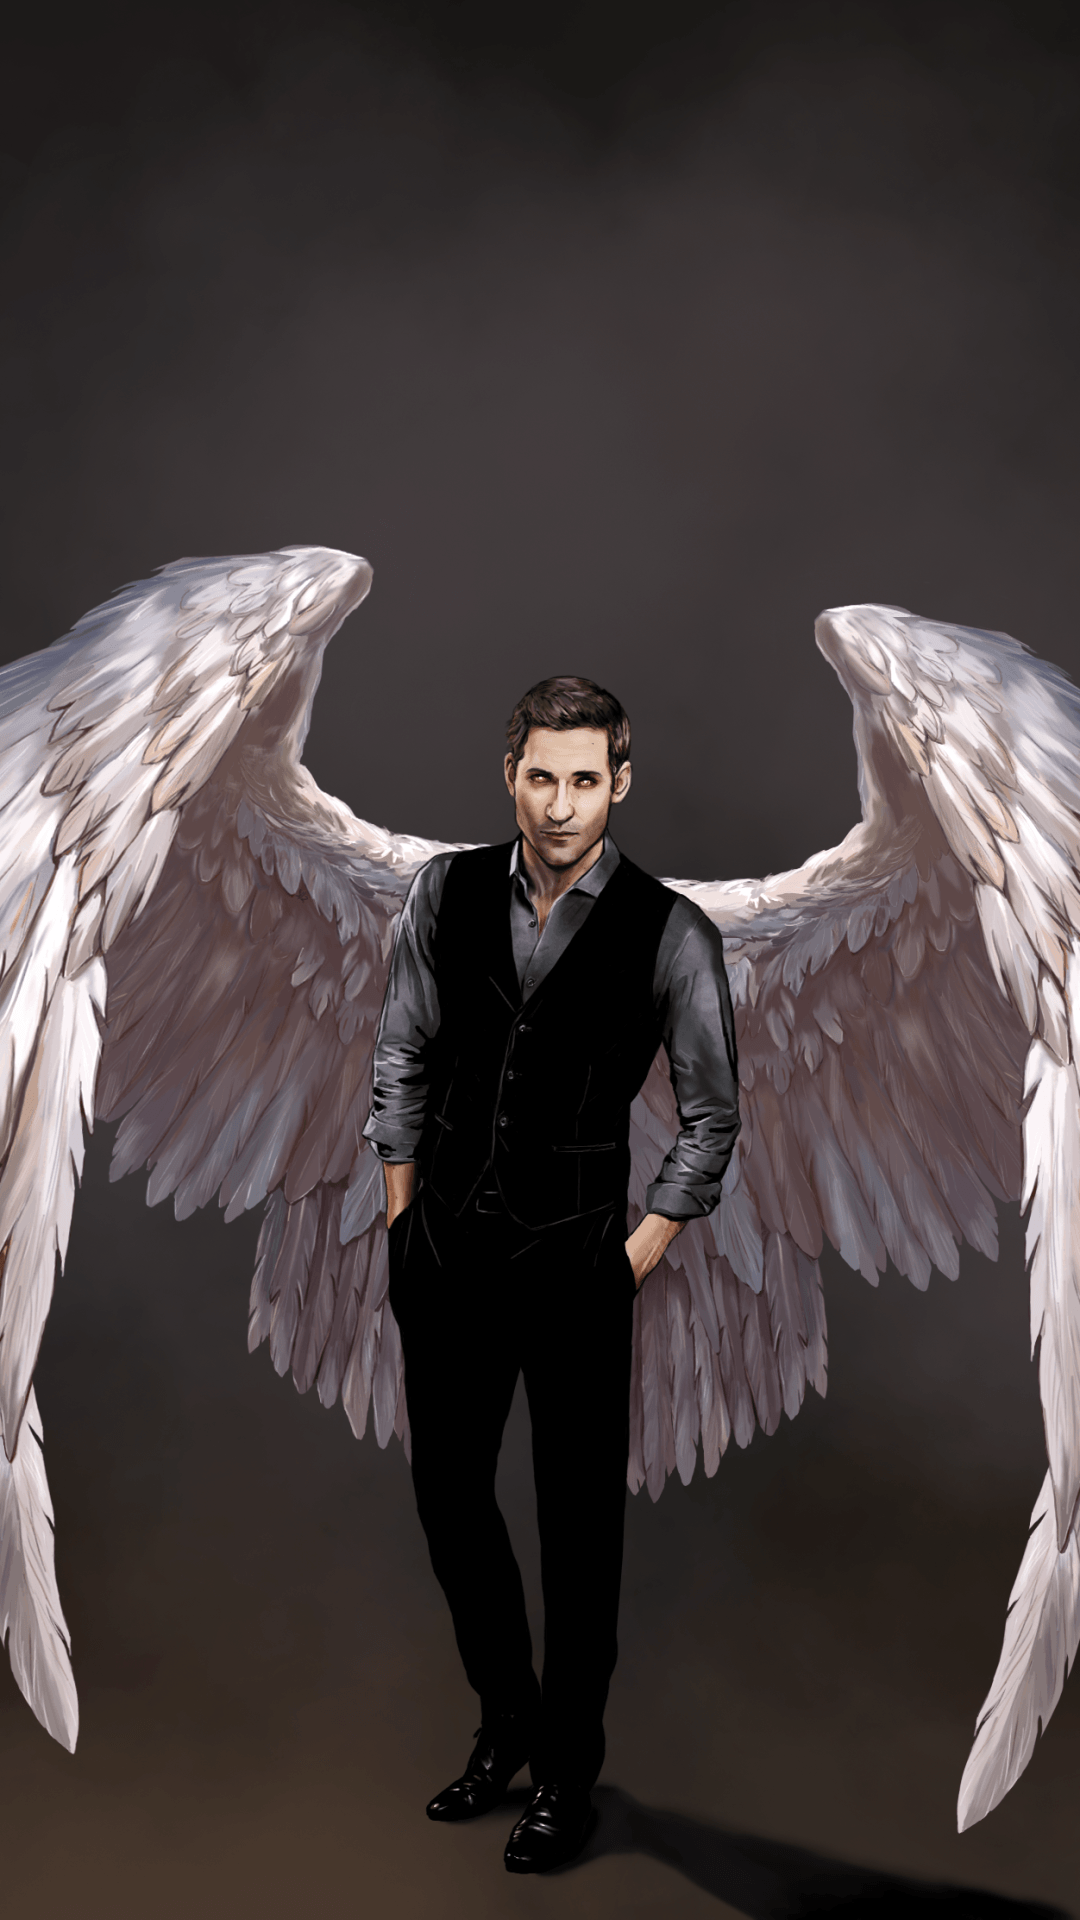 Lucifer TV Show Wallpapers - Wallpaper Cave